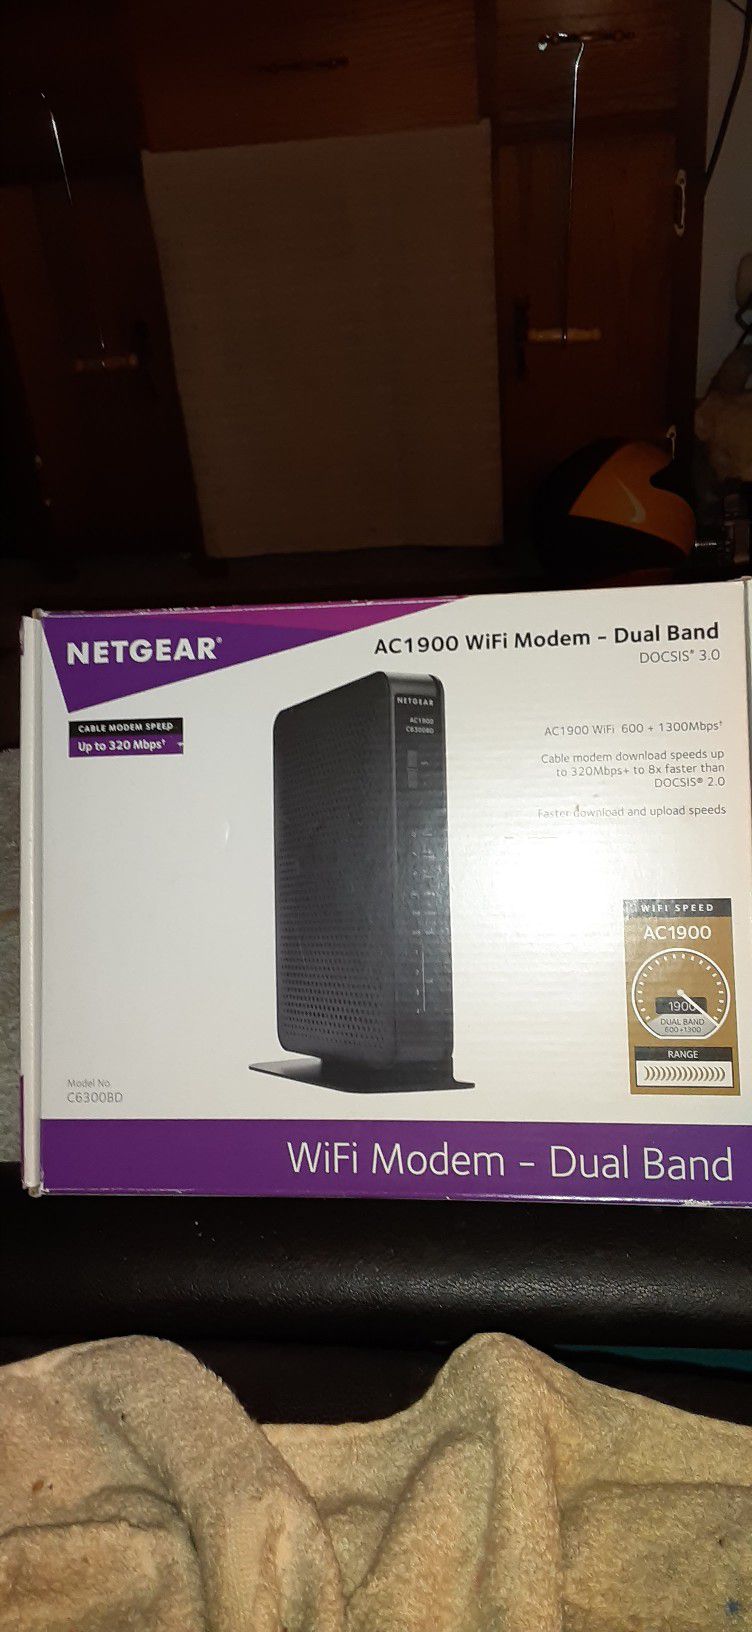 NETGEAR AC1900 MODEM AND ROUTER IN ONE